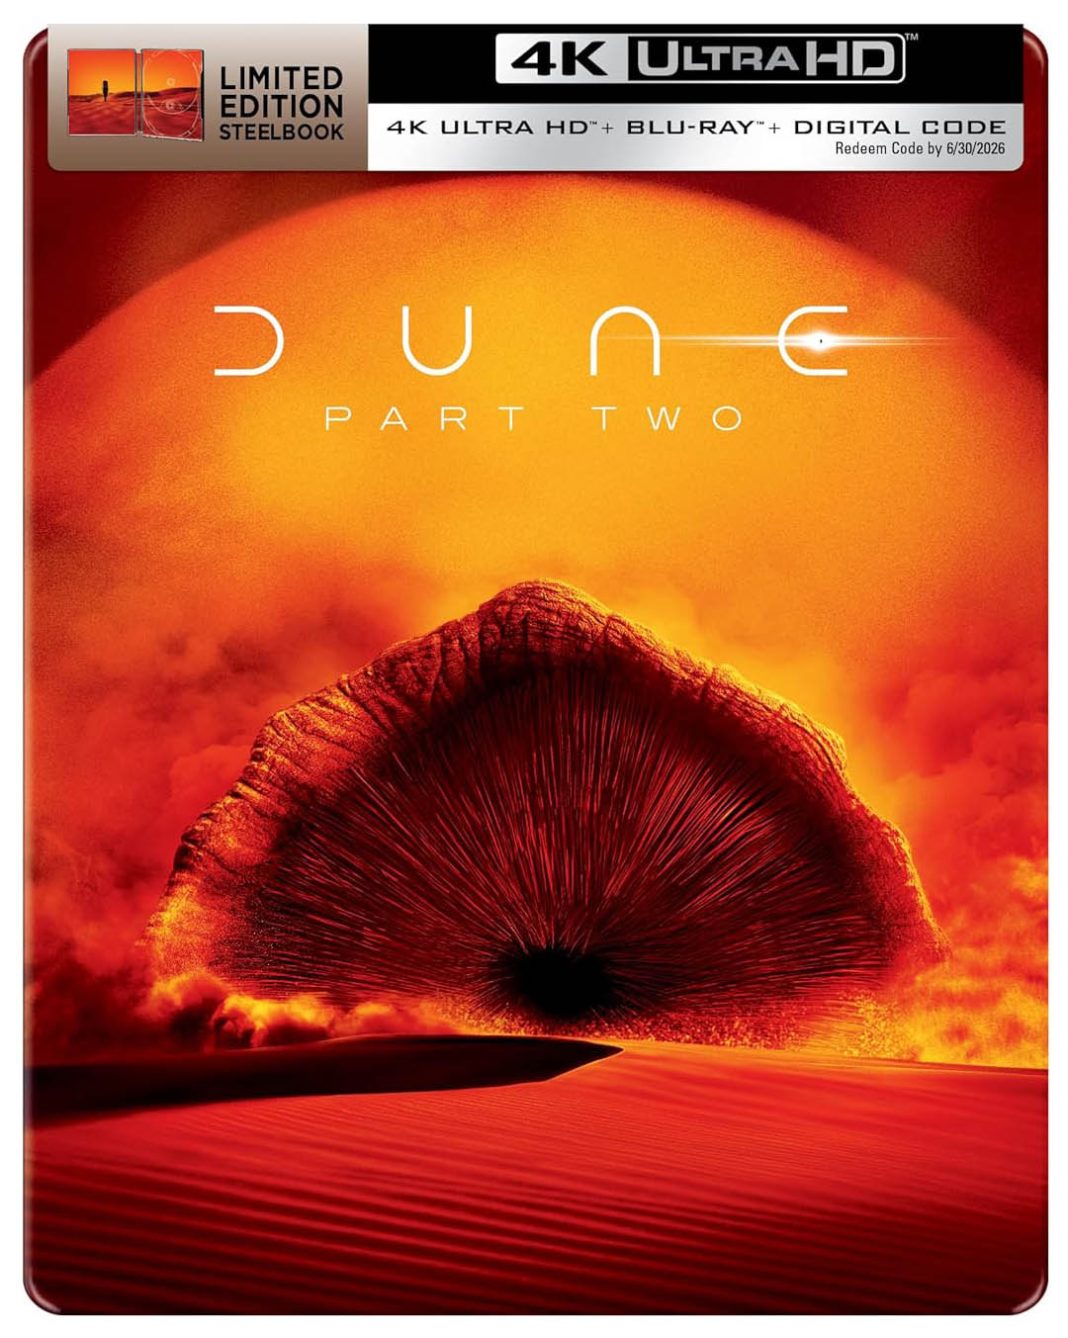 Dune: Part Two Limited Edition 4k SteelBook